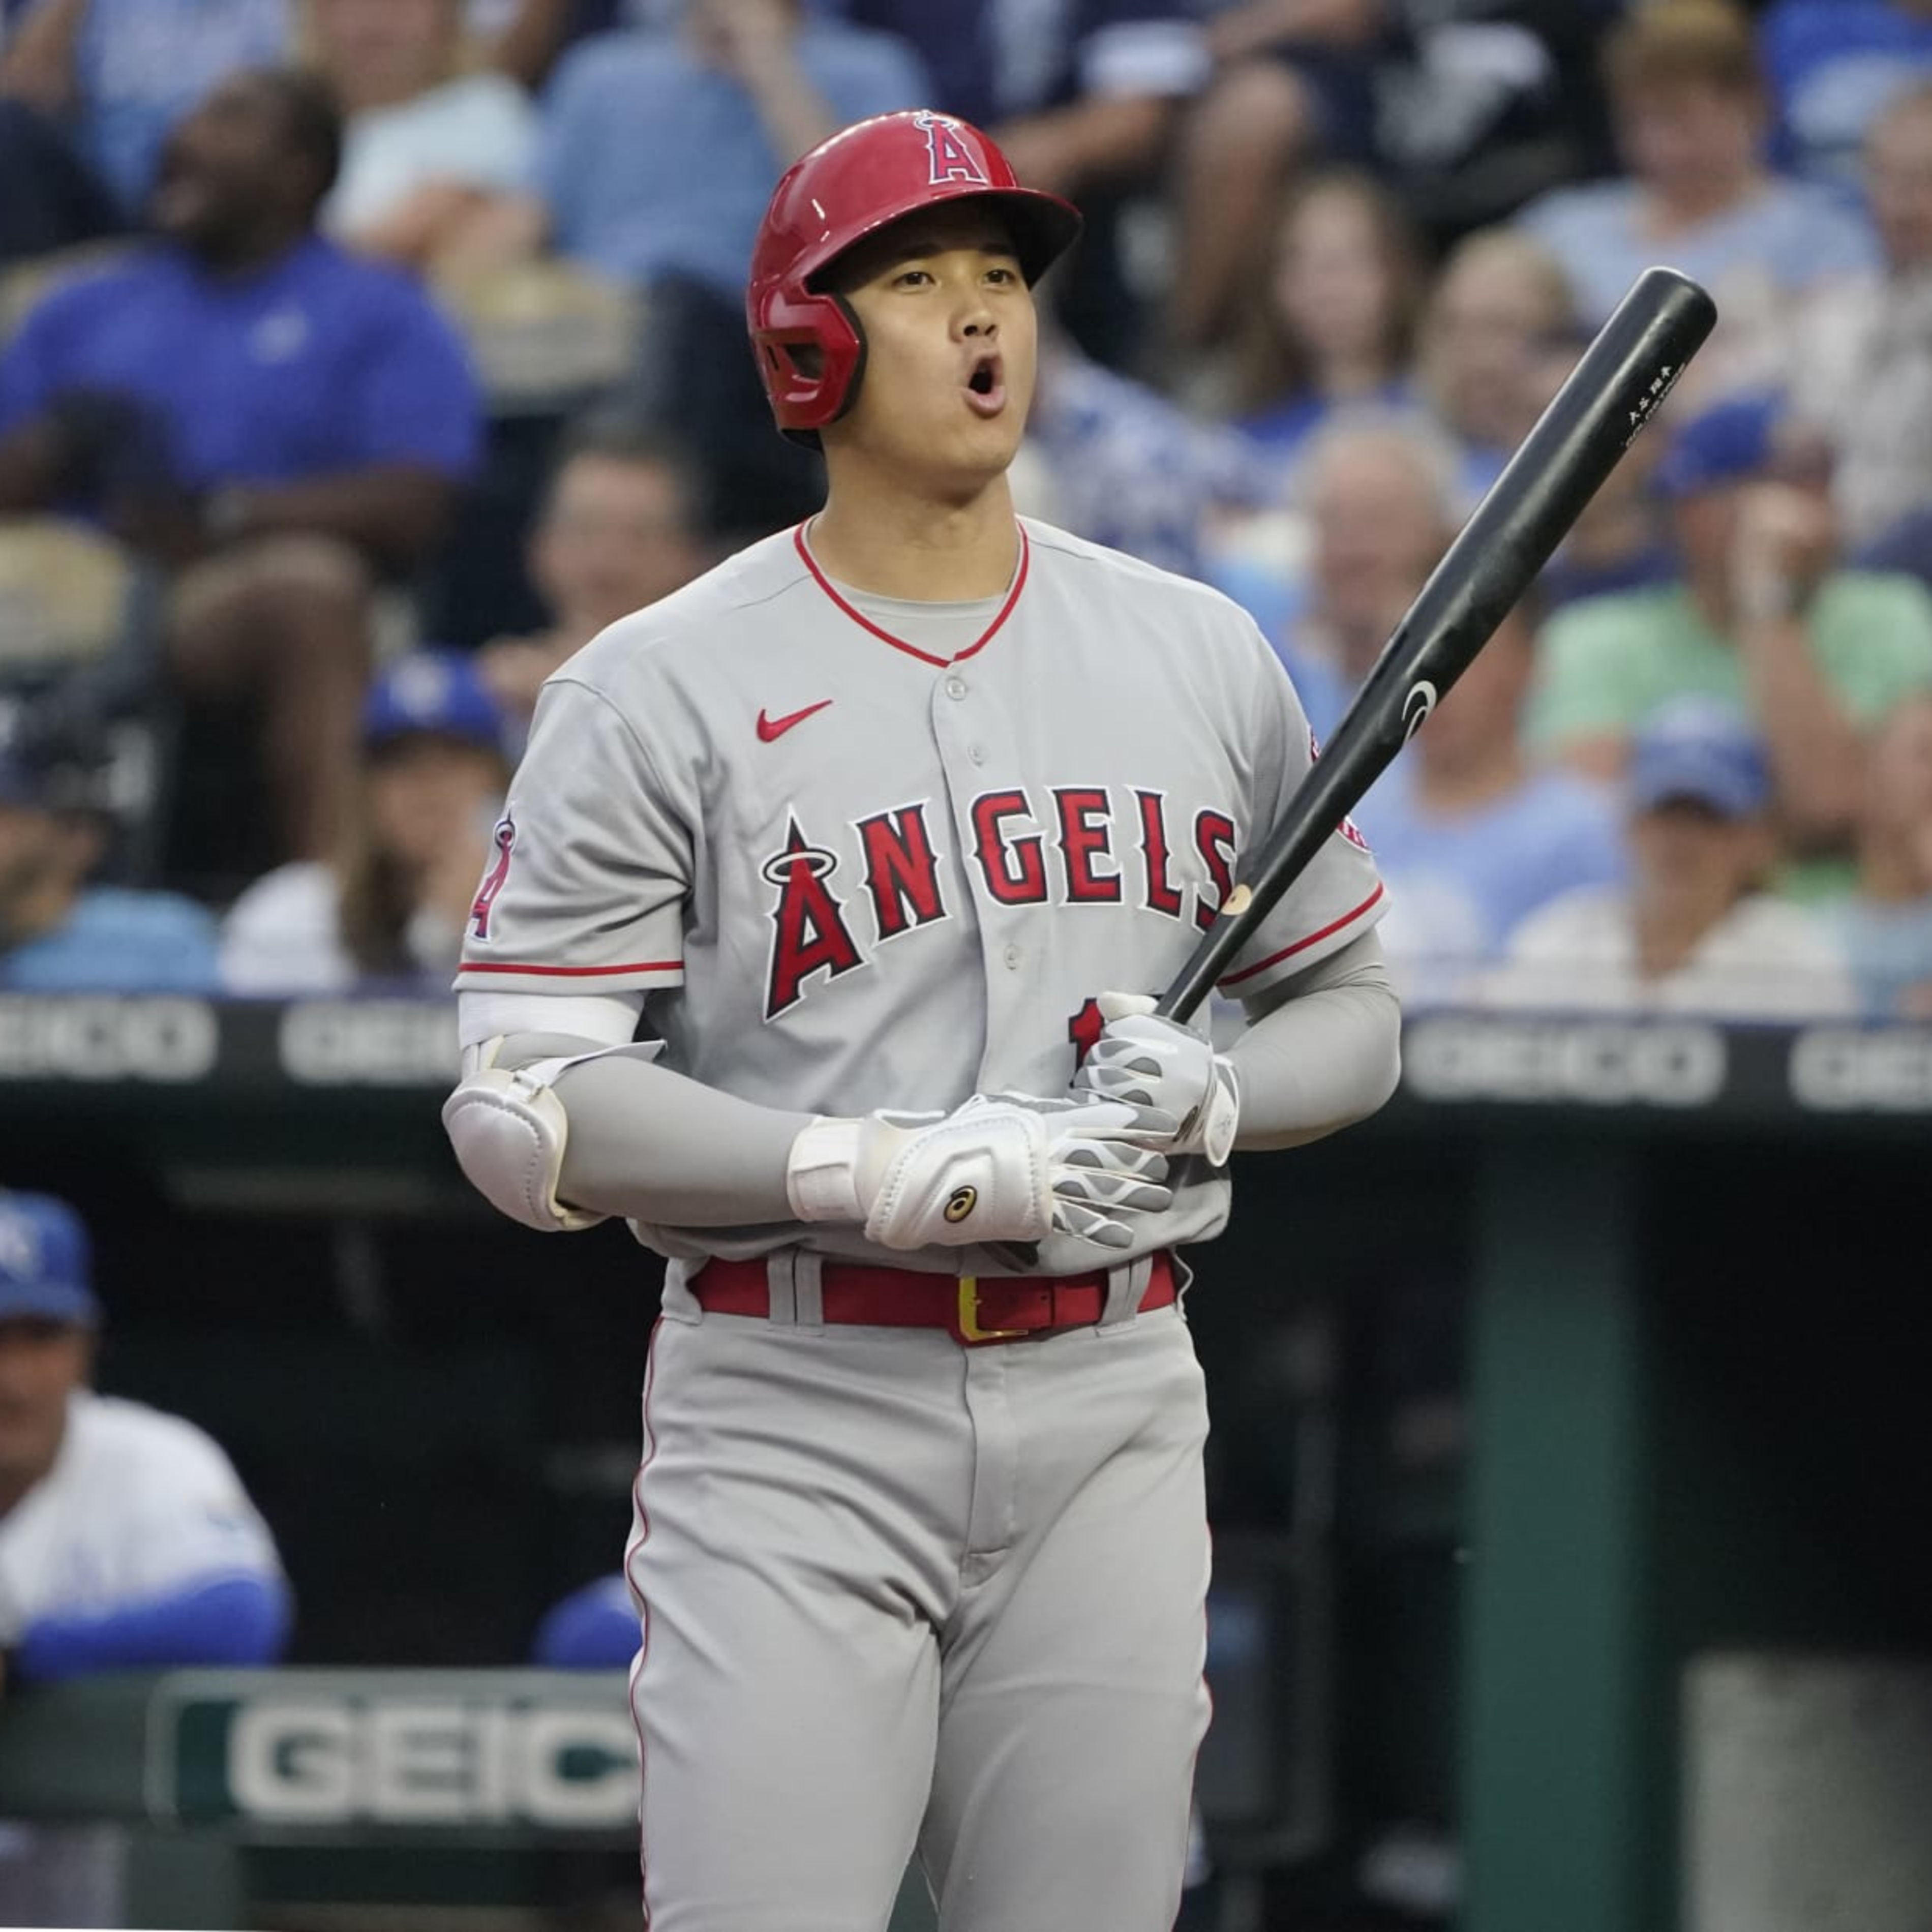 Shohei Ohtani Rumors: MLB Exec Says Angels Want 'Your Top 4 Prospects' in Trade